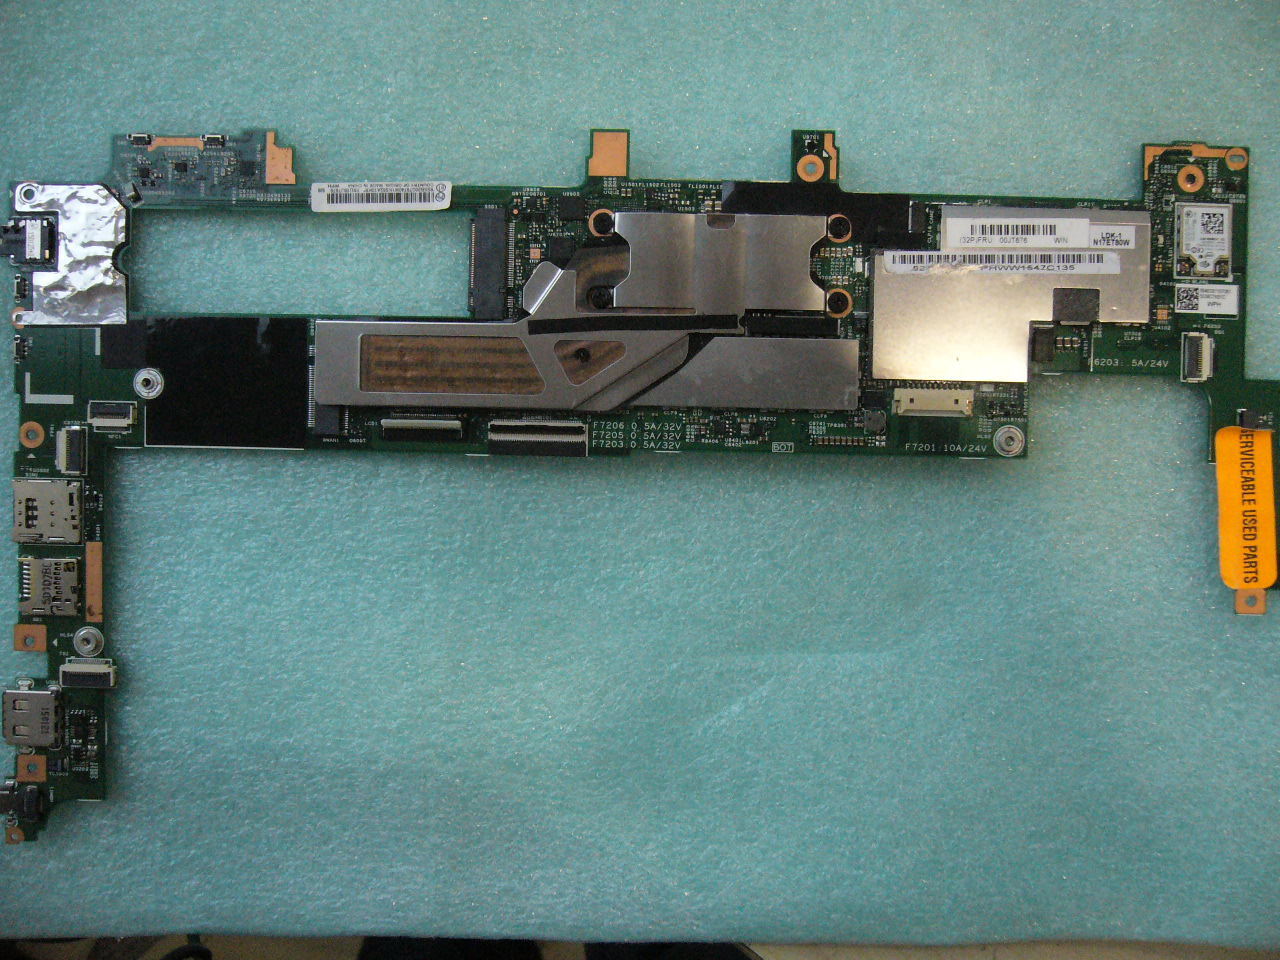 QTY 1x Lenovo Thinkpad Helix laptop motherboard Core M 5Y71 8GB 00JT676 LDK-1.5 - Click Image to Close